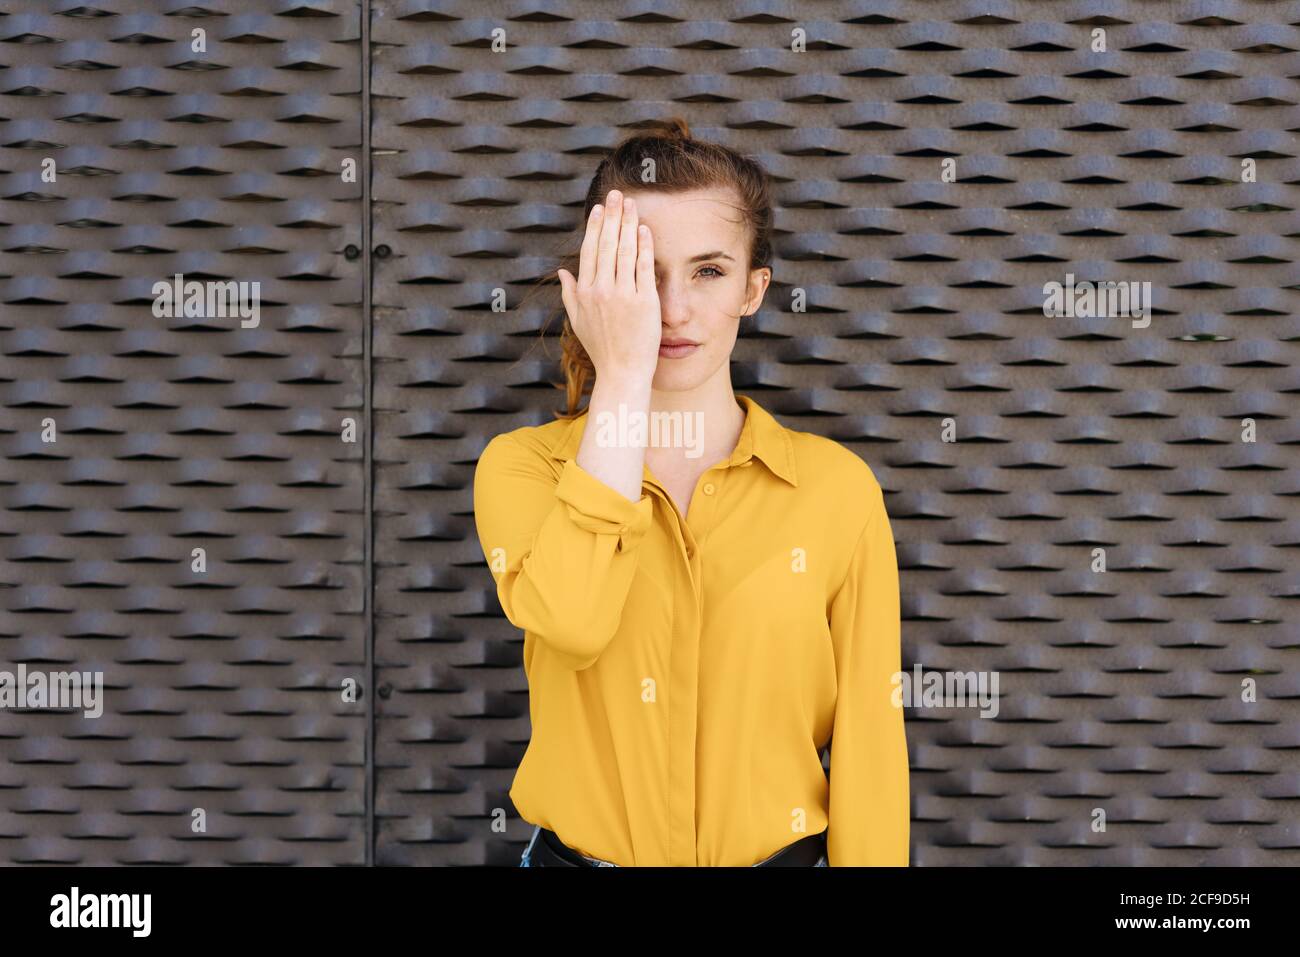 Serious young woman covering one eye with her hand as she poses in front of a textured brown wall with copyspace Stock Photo